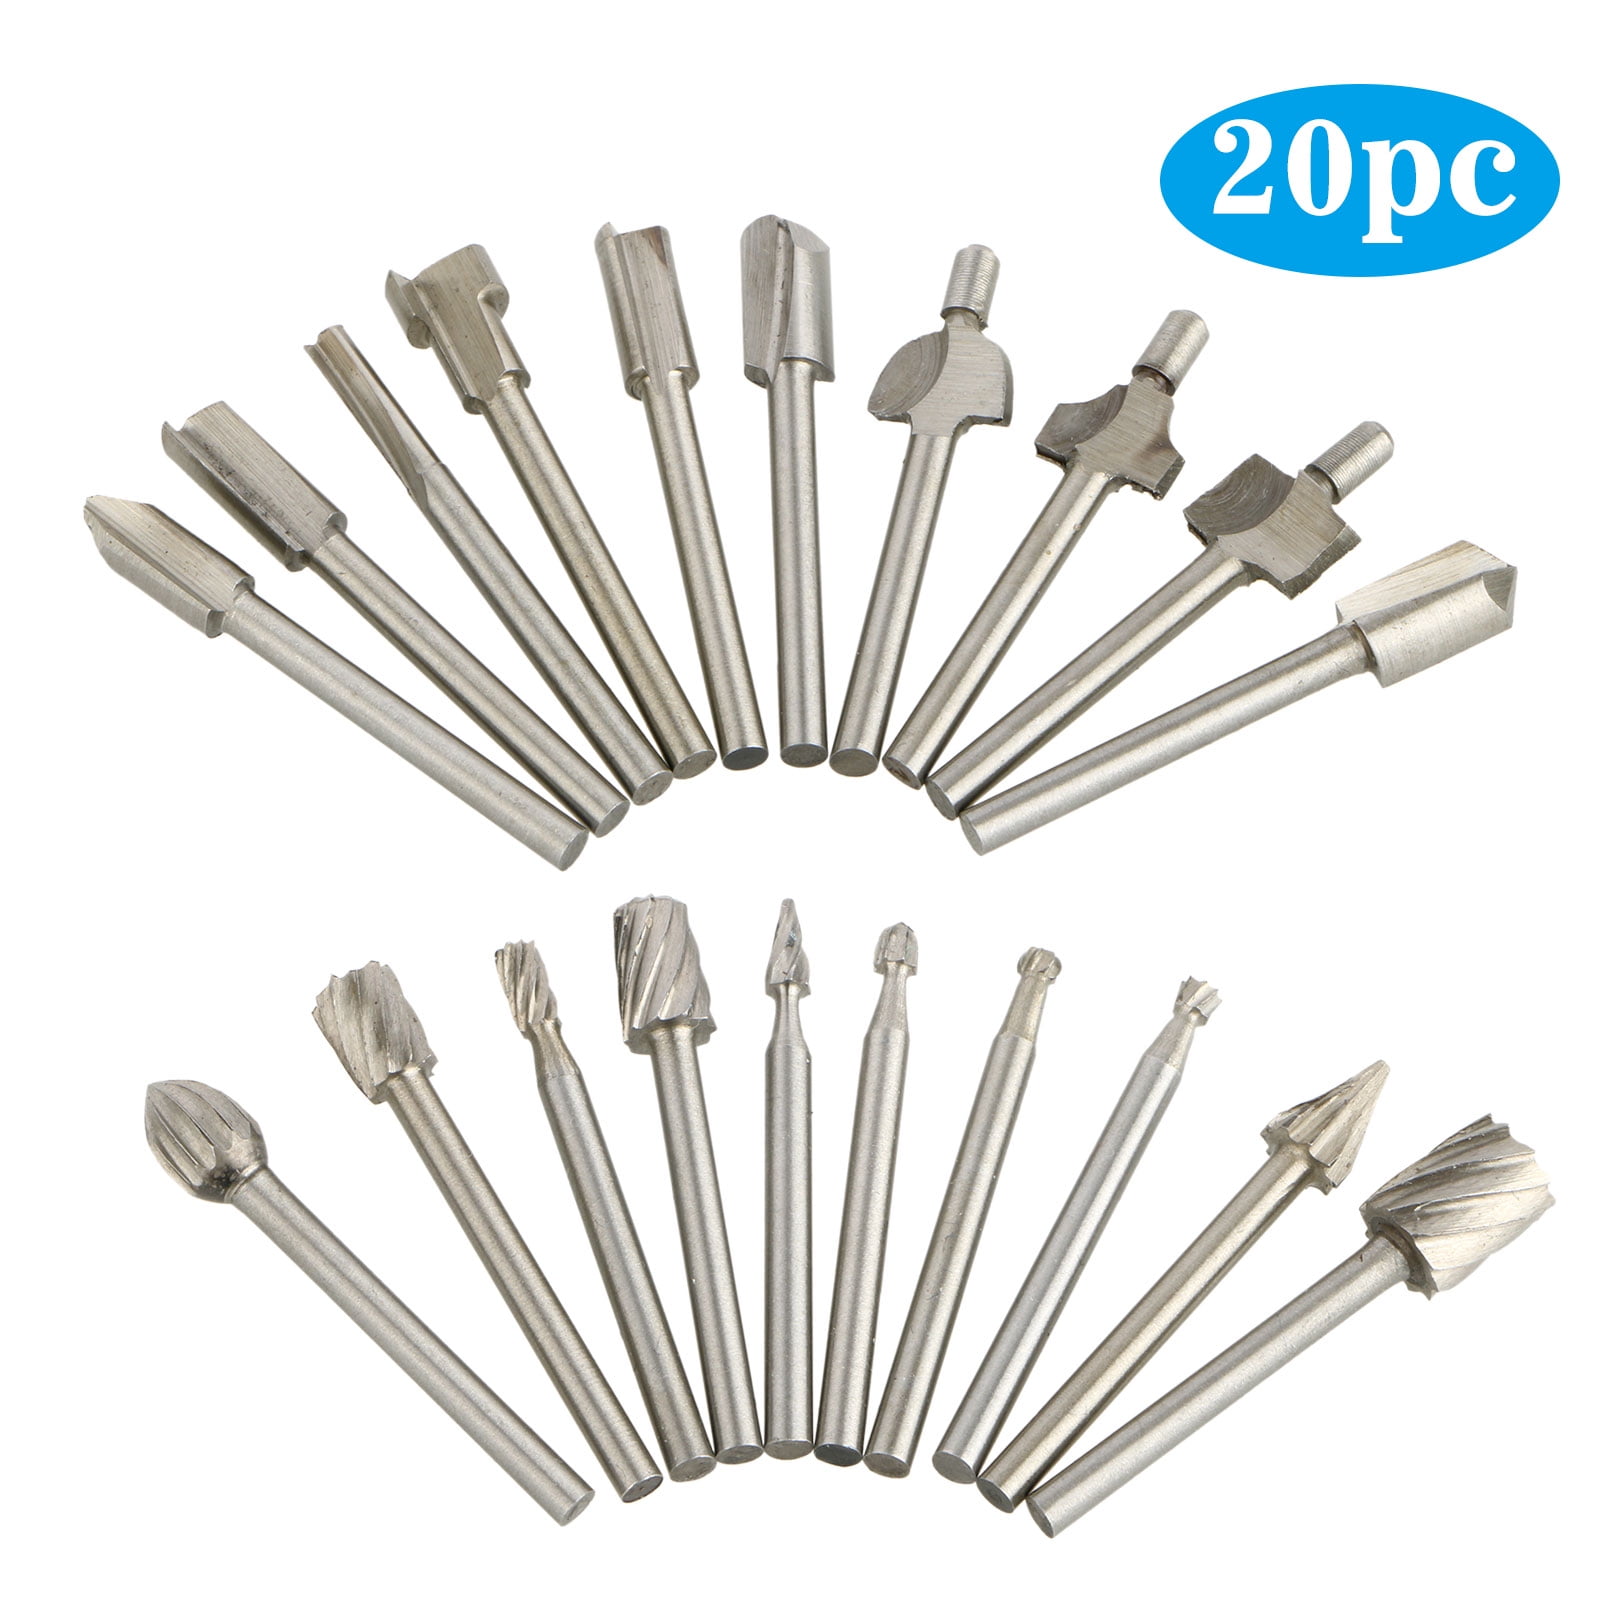 10 Pcs Steel Mini Steel Router Bits For Dremel Rotary Tool Set TO 